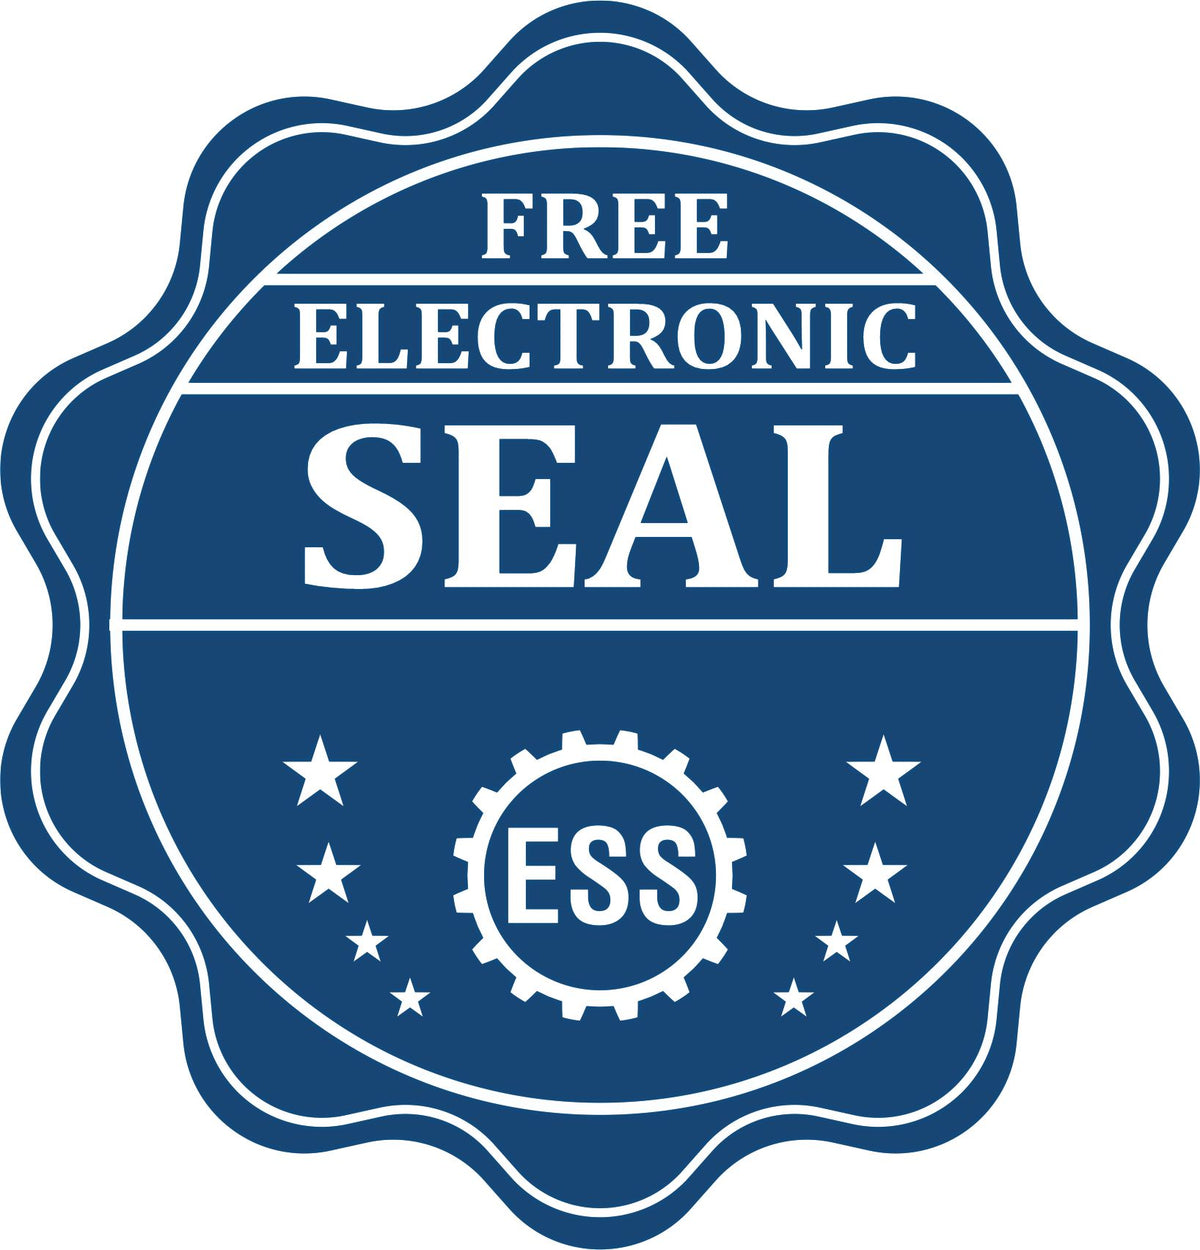 A badge showing a free electronic seal for the Super Slim North Dakota Notary Public Stamp with stars and the ESS gear on the emblem.